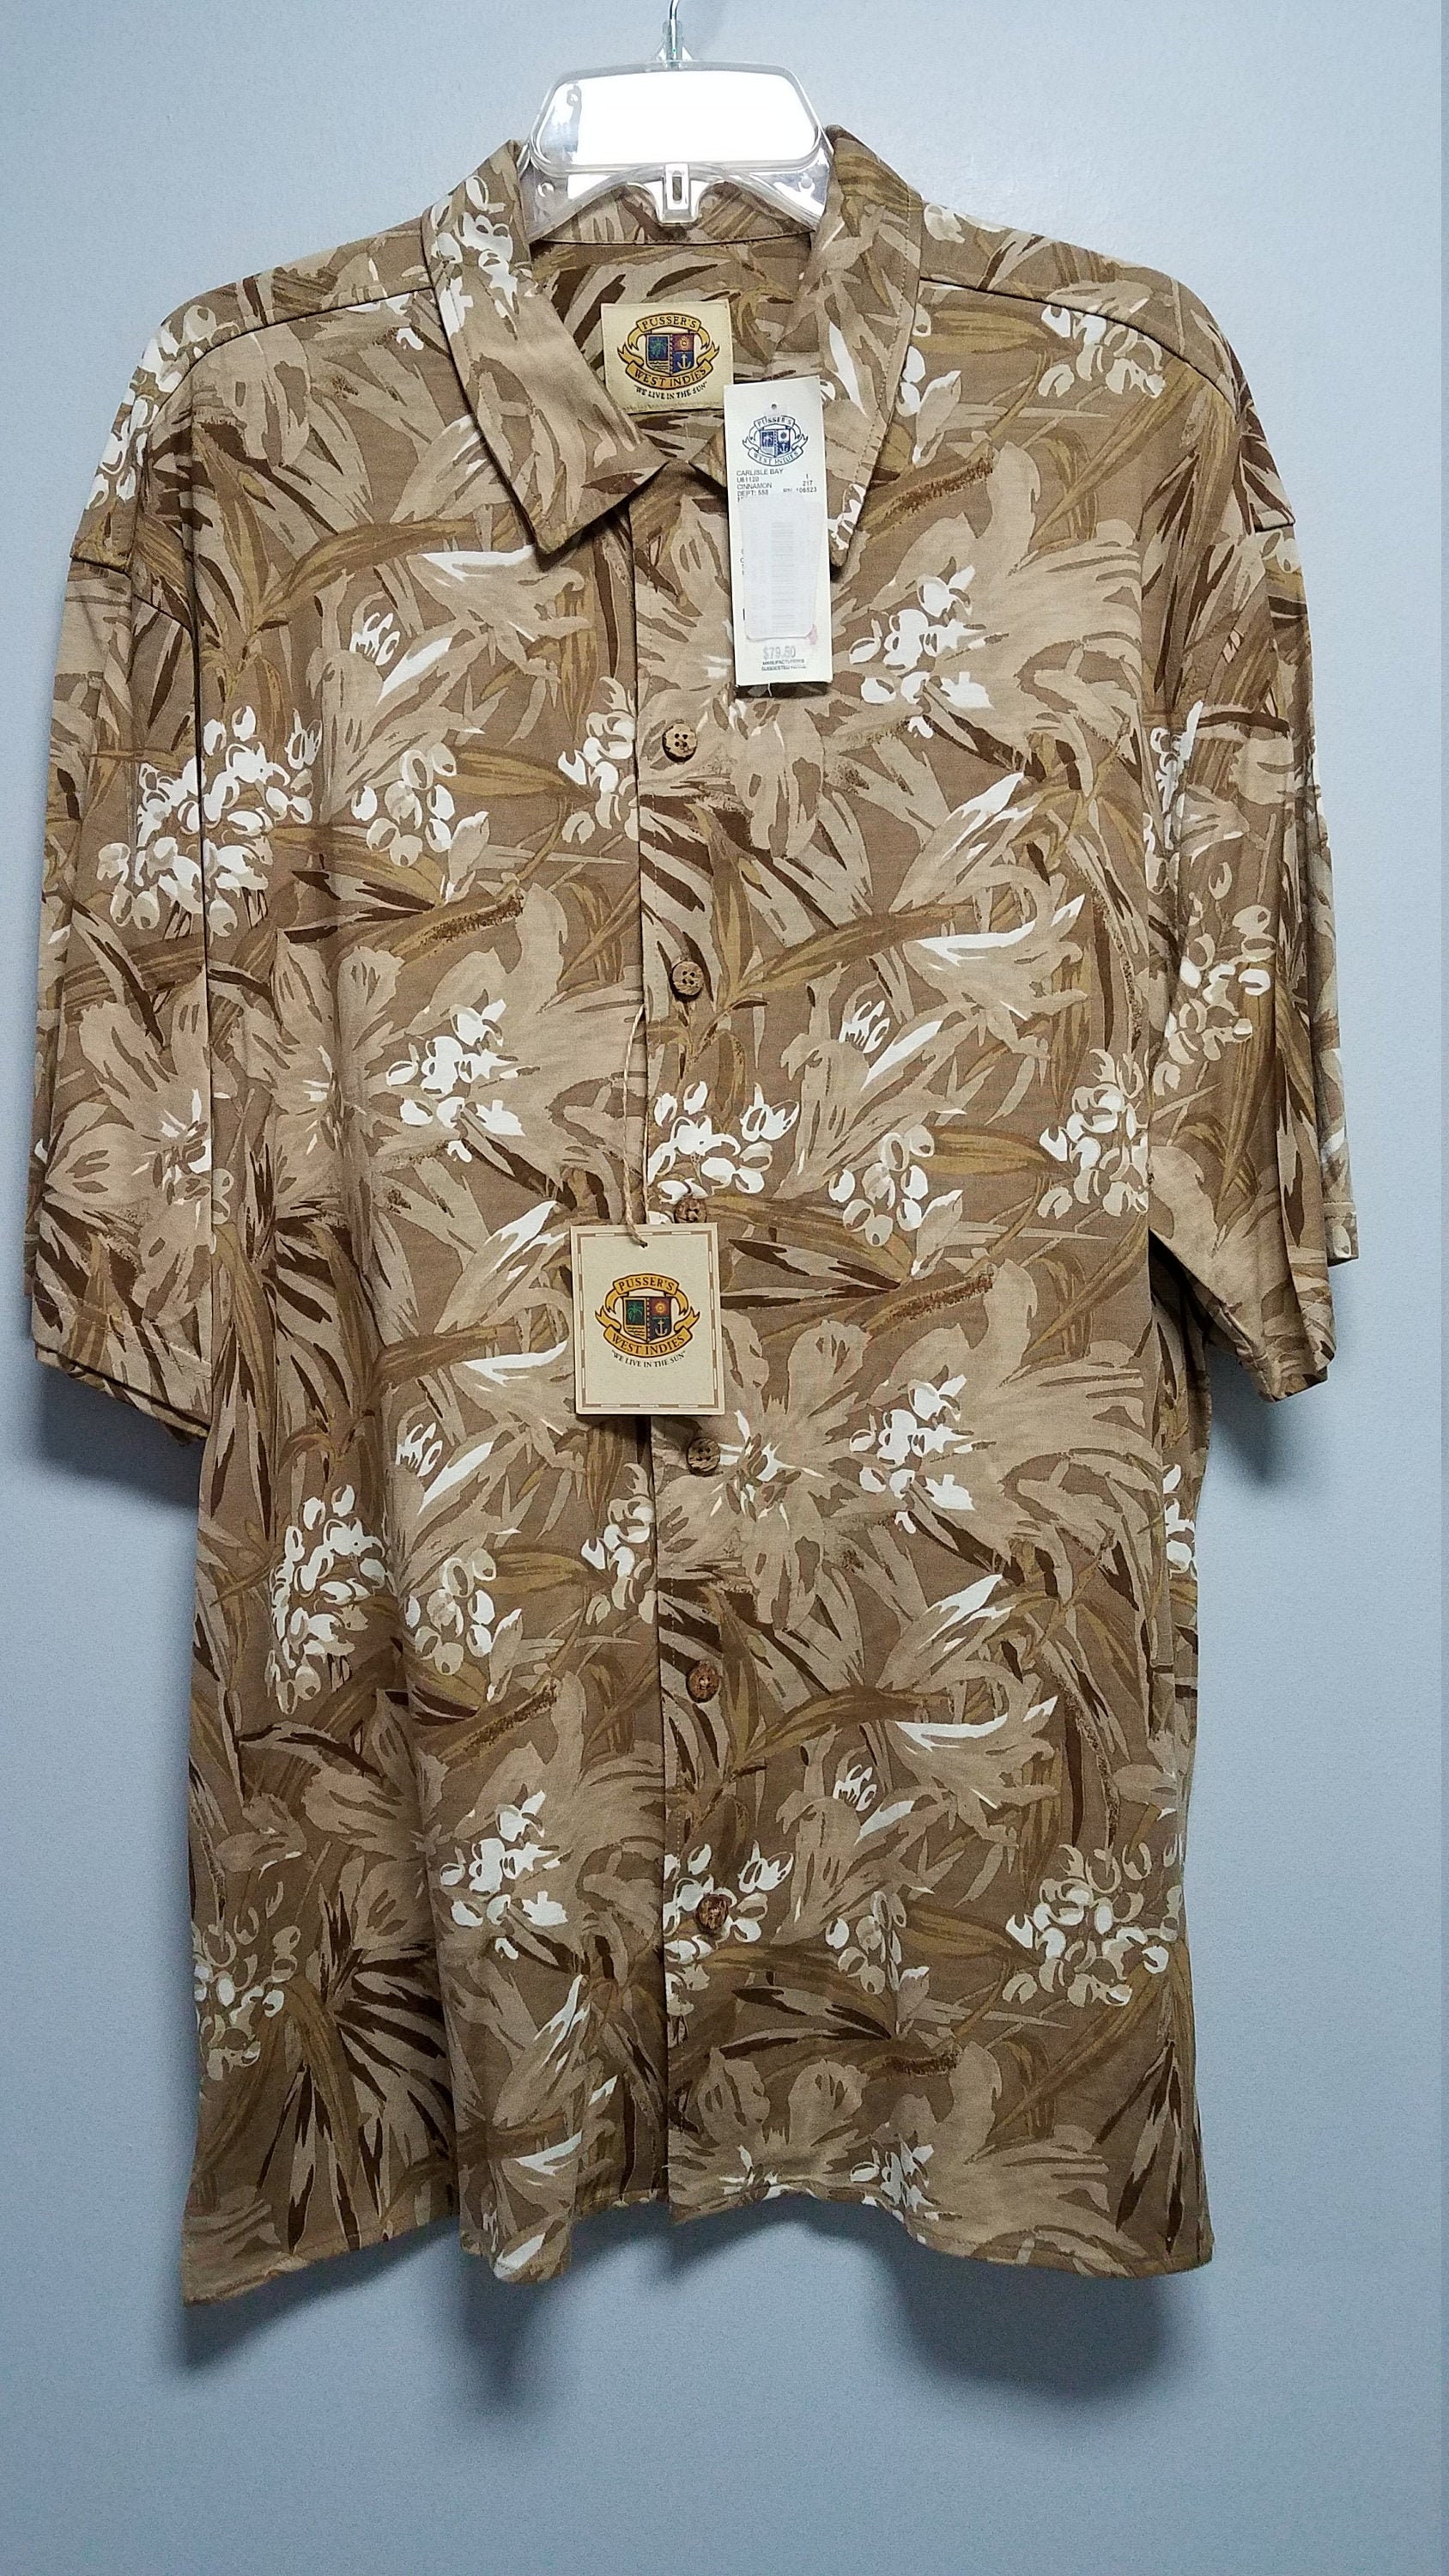 Vintage Silk/Cotton Blend Shirt By Pusser's Never Worn, Still With Tags On